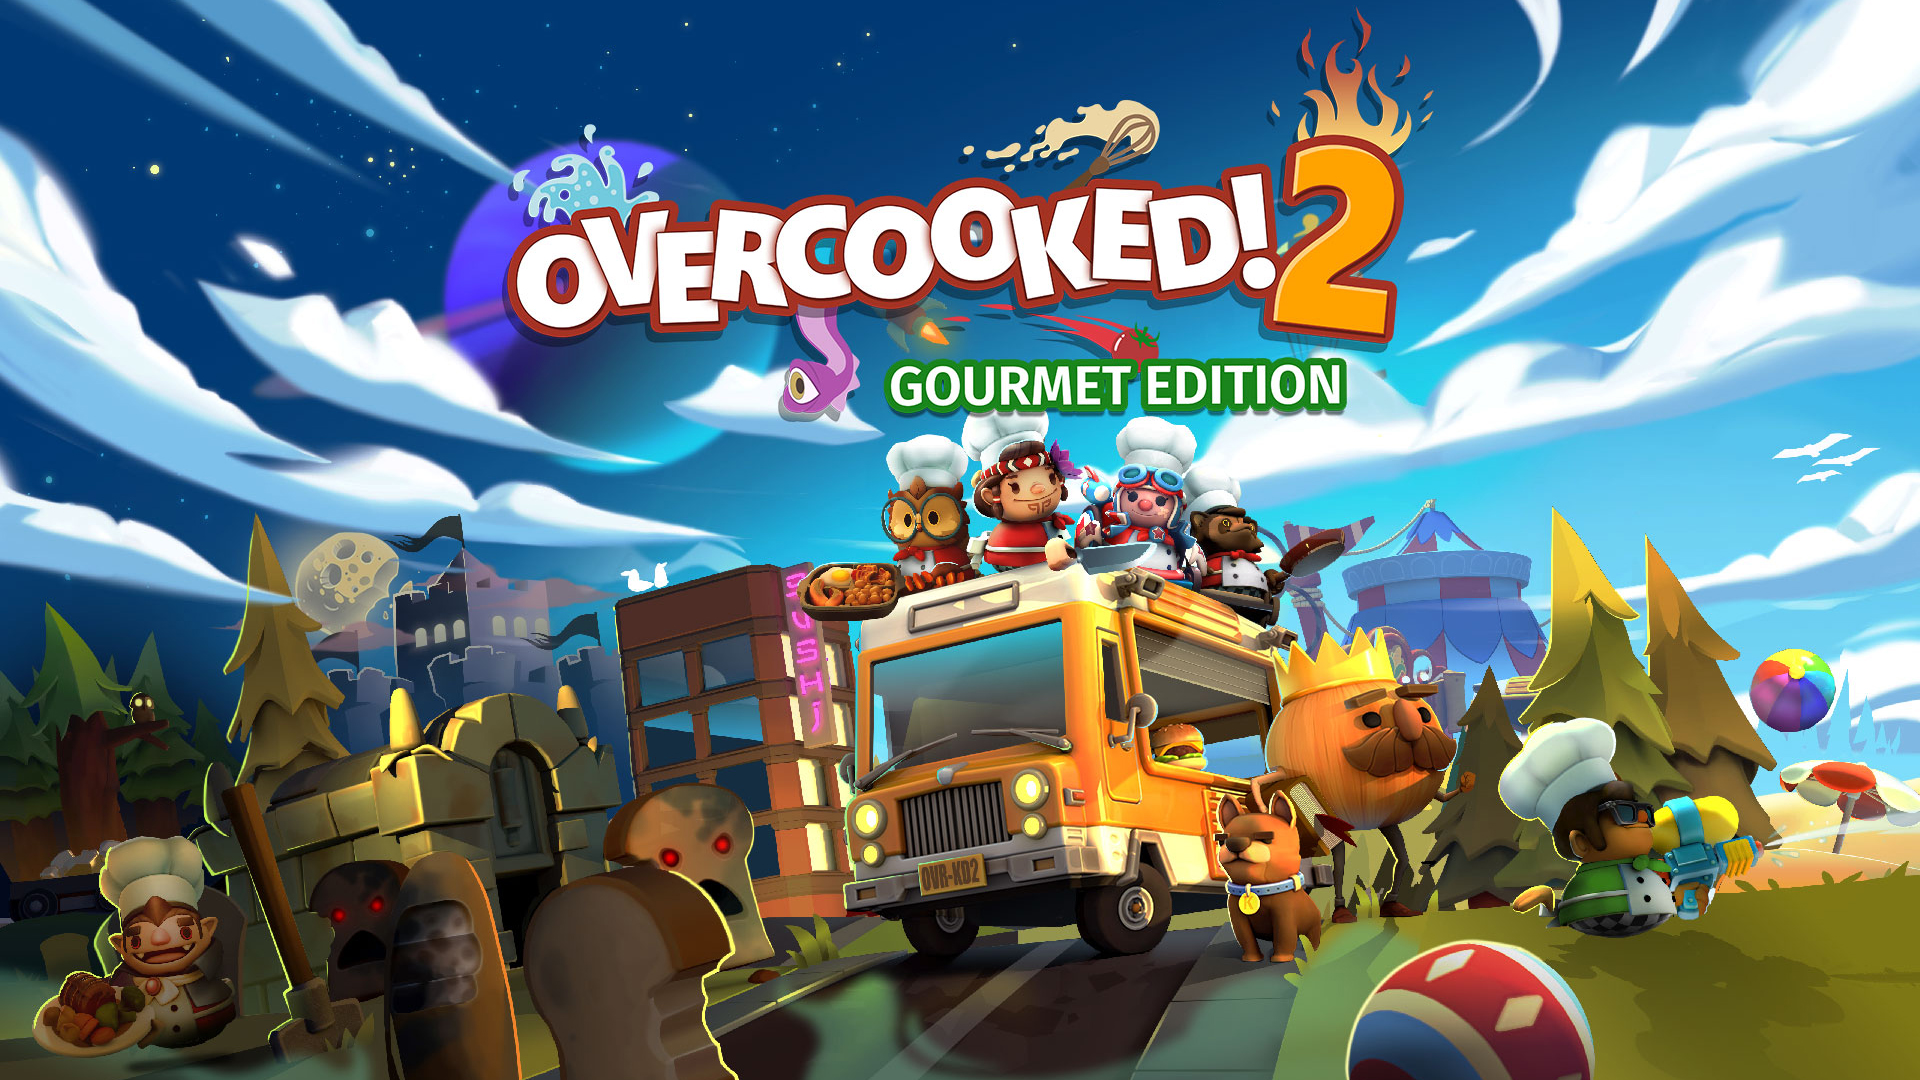 overcooked 1 and 2 bundle ps4